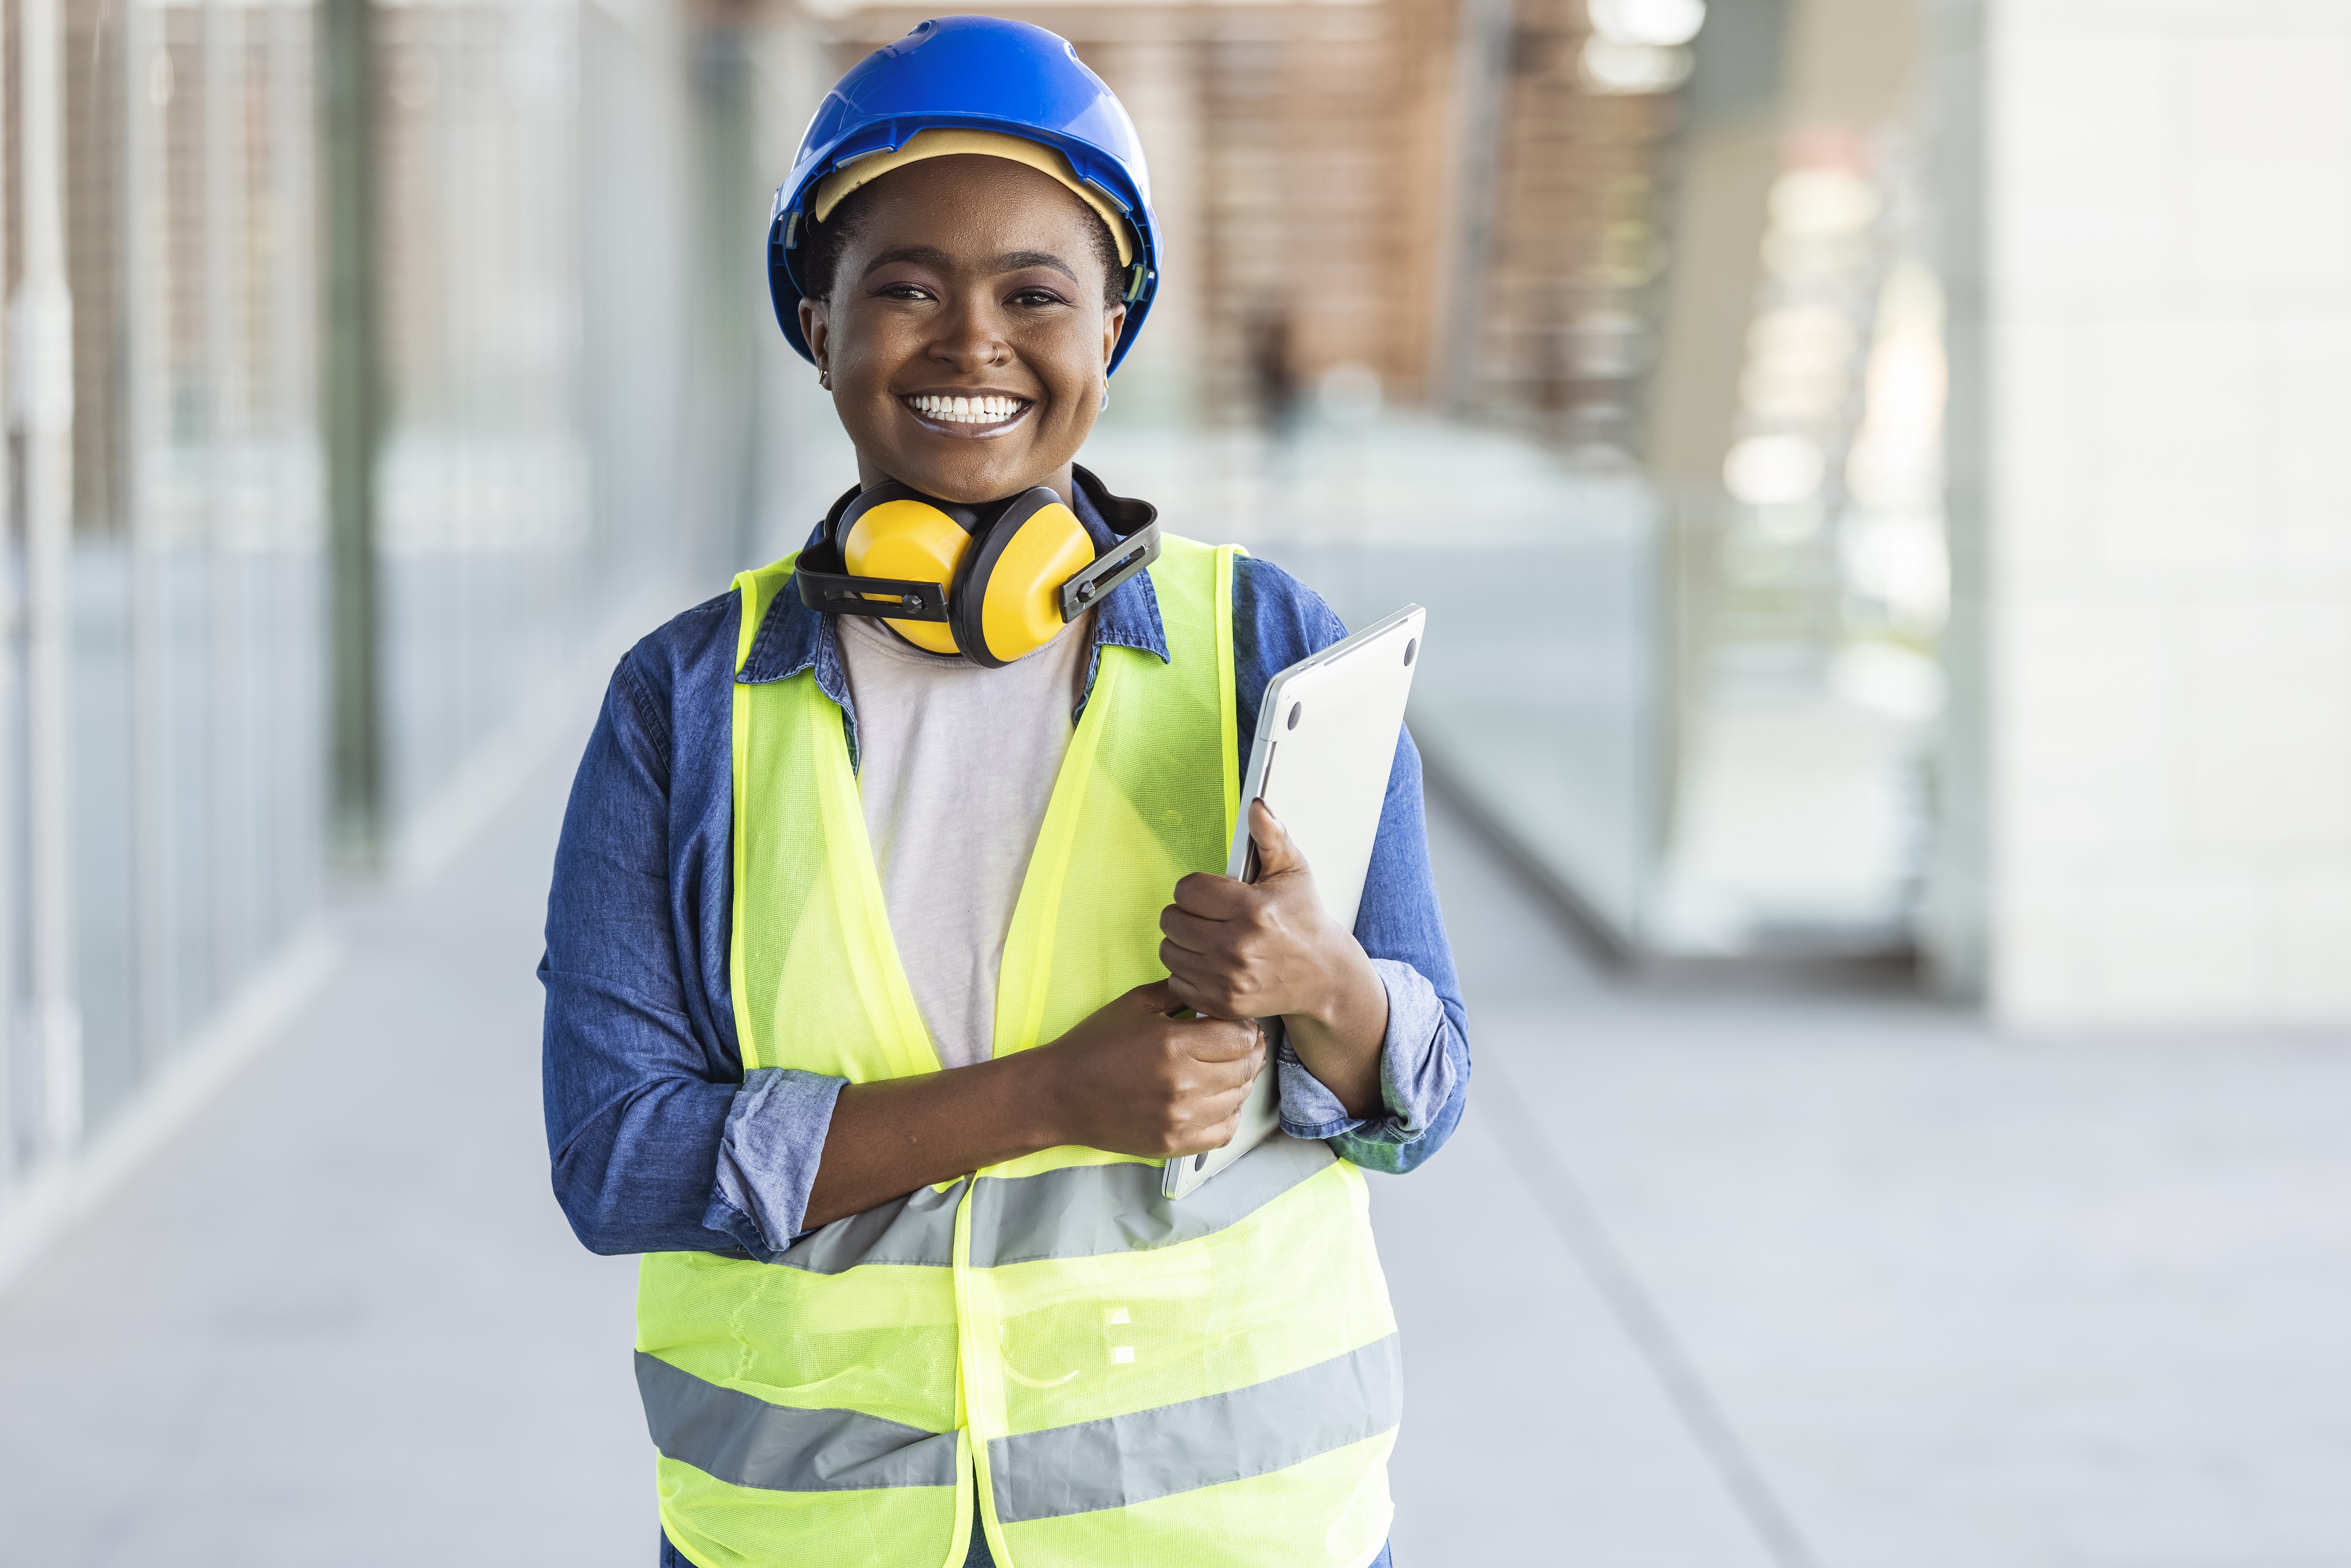 CIOB: Construction needs image makeover to attract more recruits